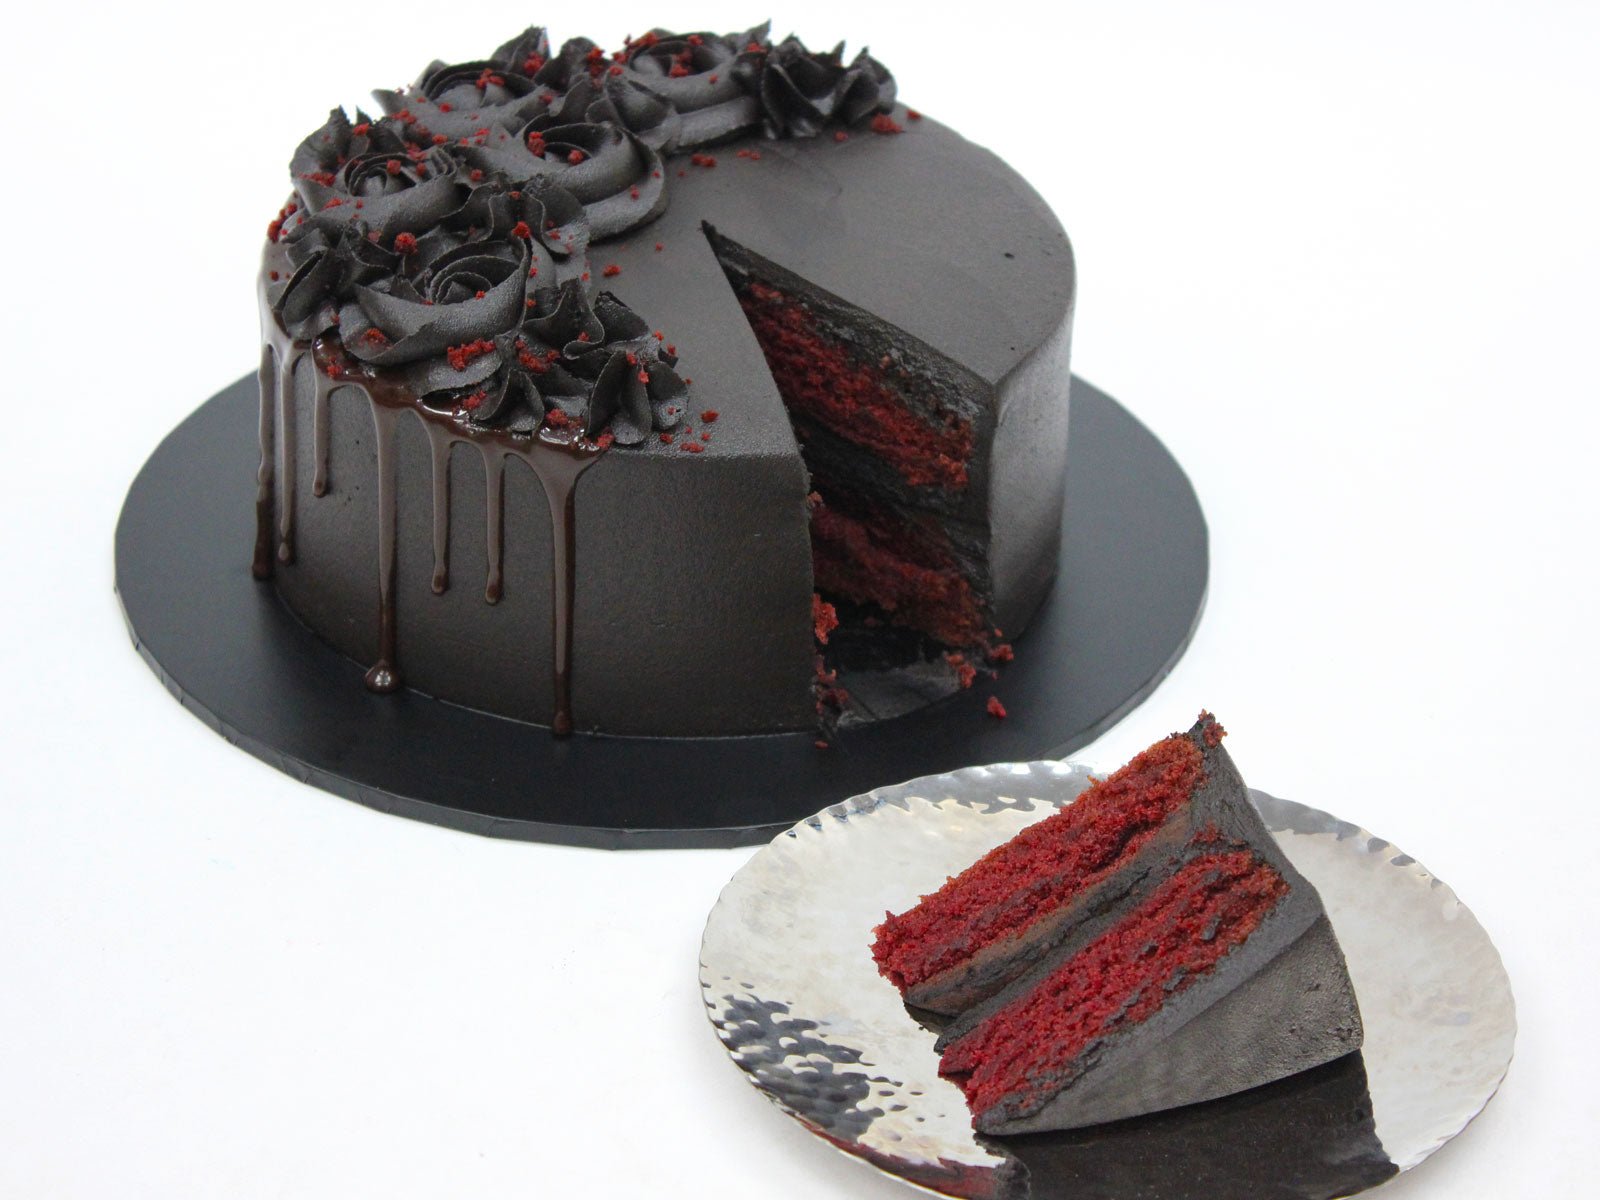 Red Velvet Goth Cake stock photo. Image of decorated - 15598536